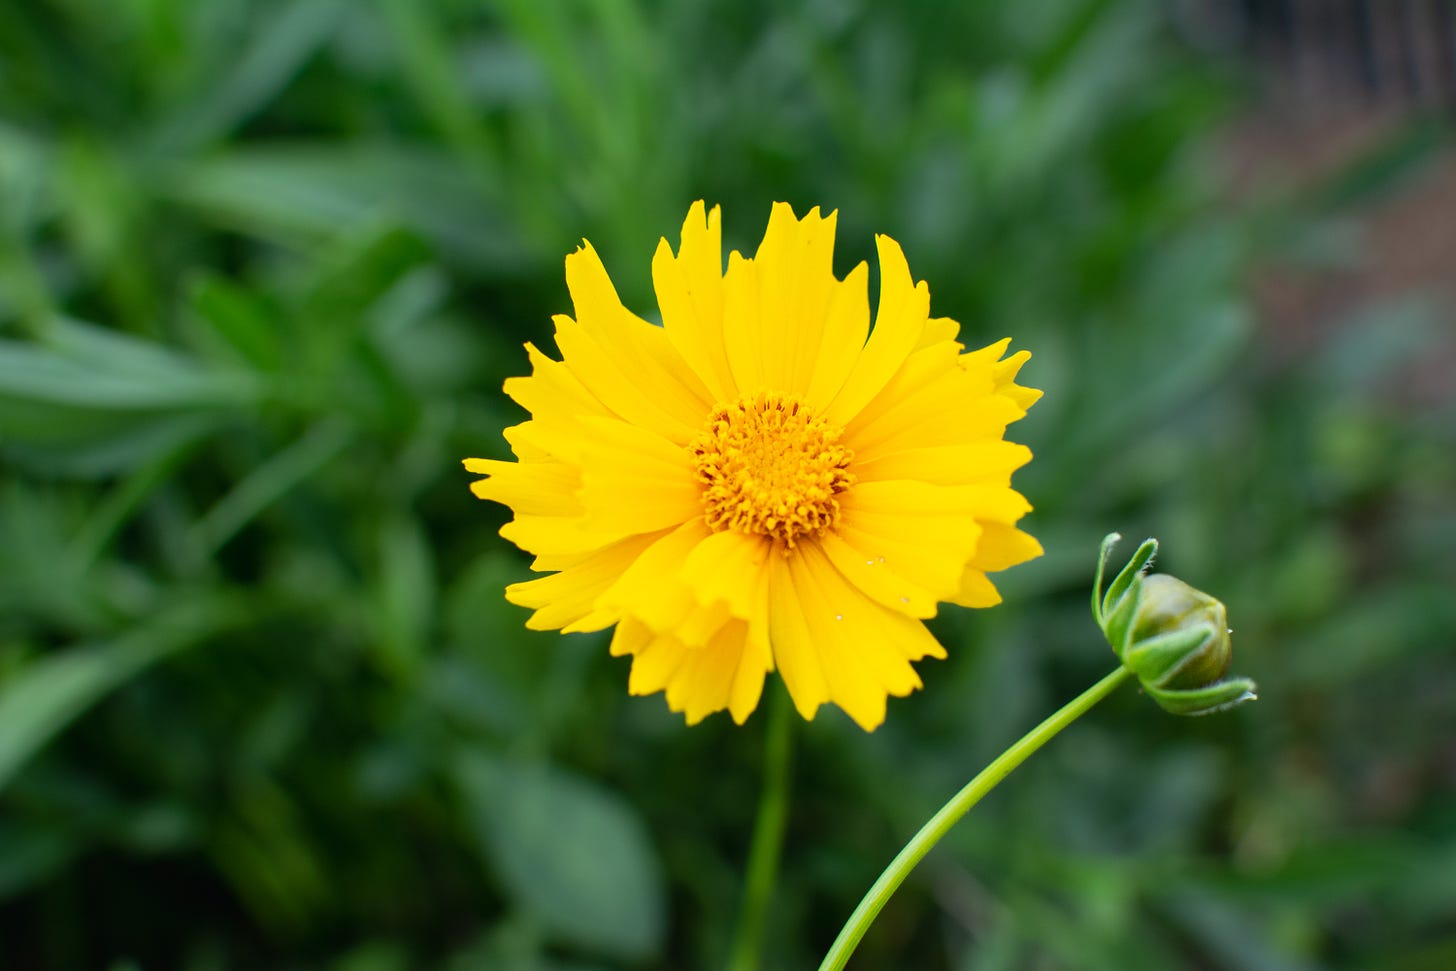 a single yellow coriopsis bloom against the blurred gren leaves with another unopened bloom at the right